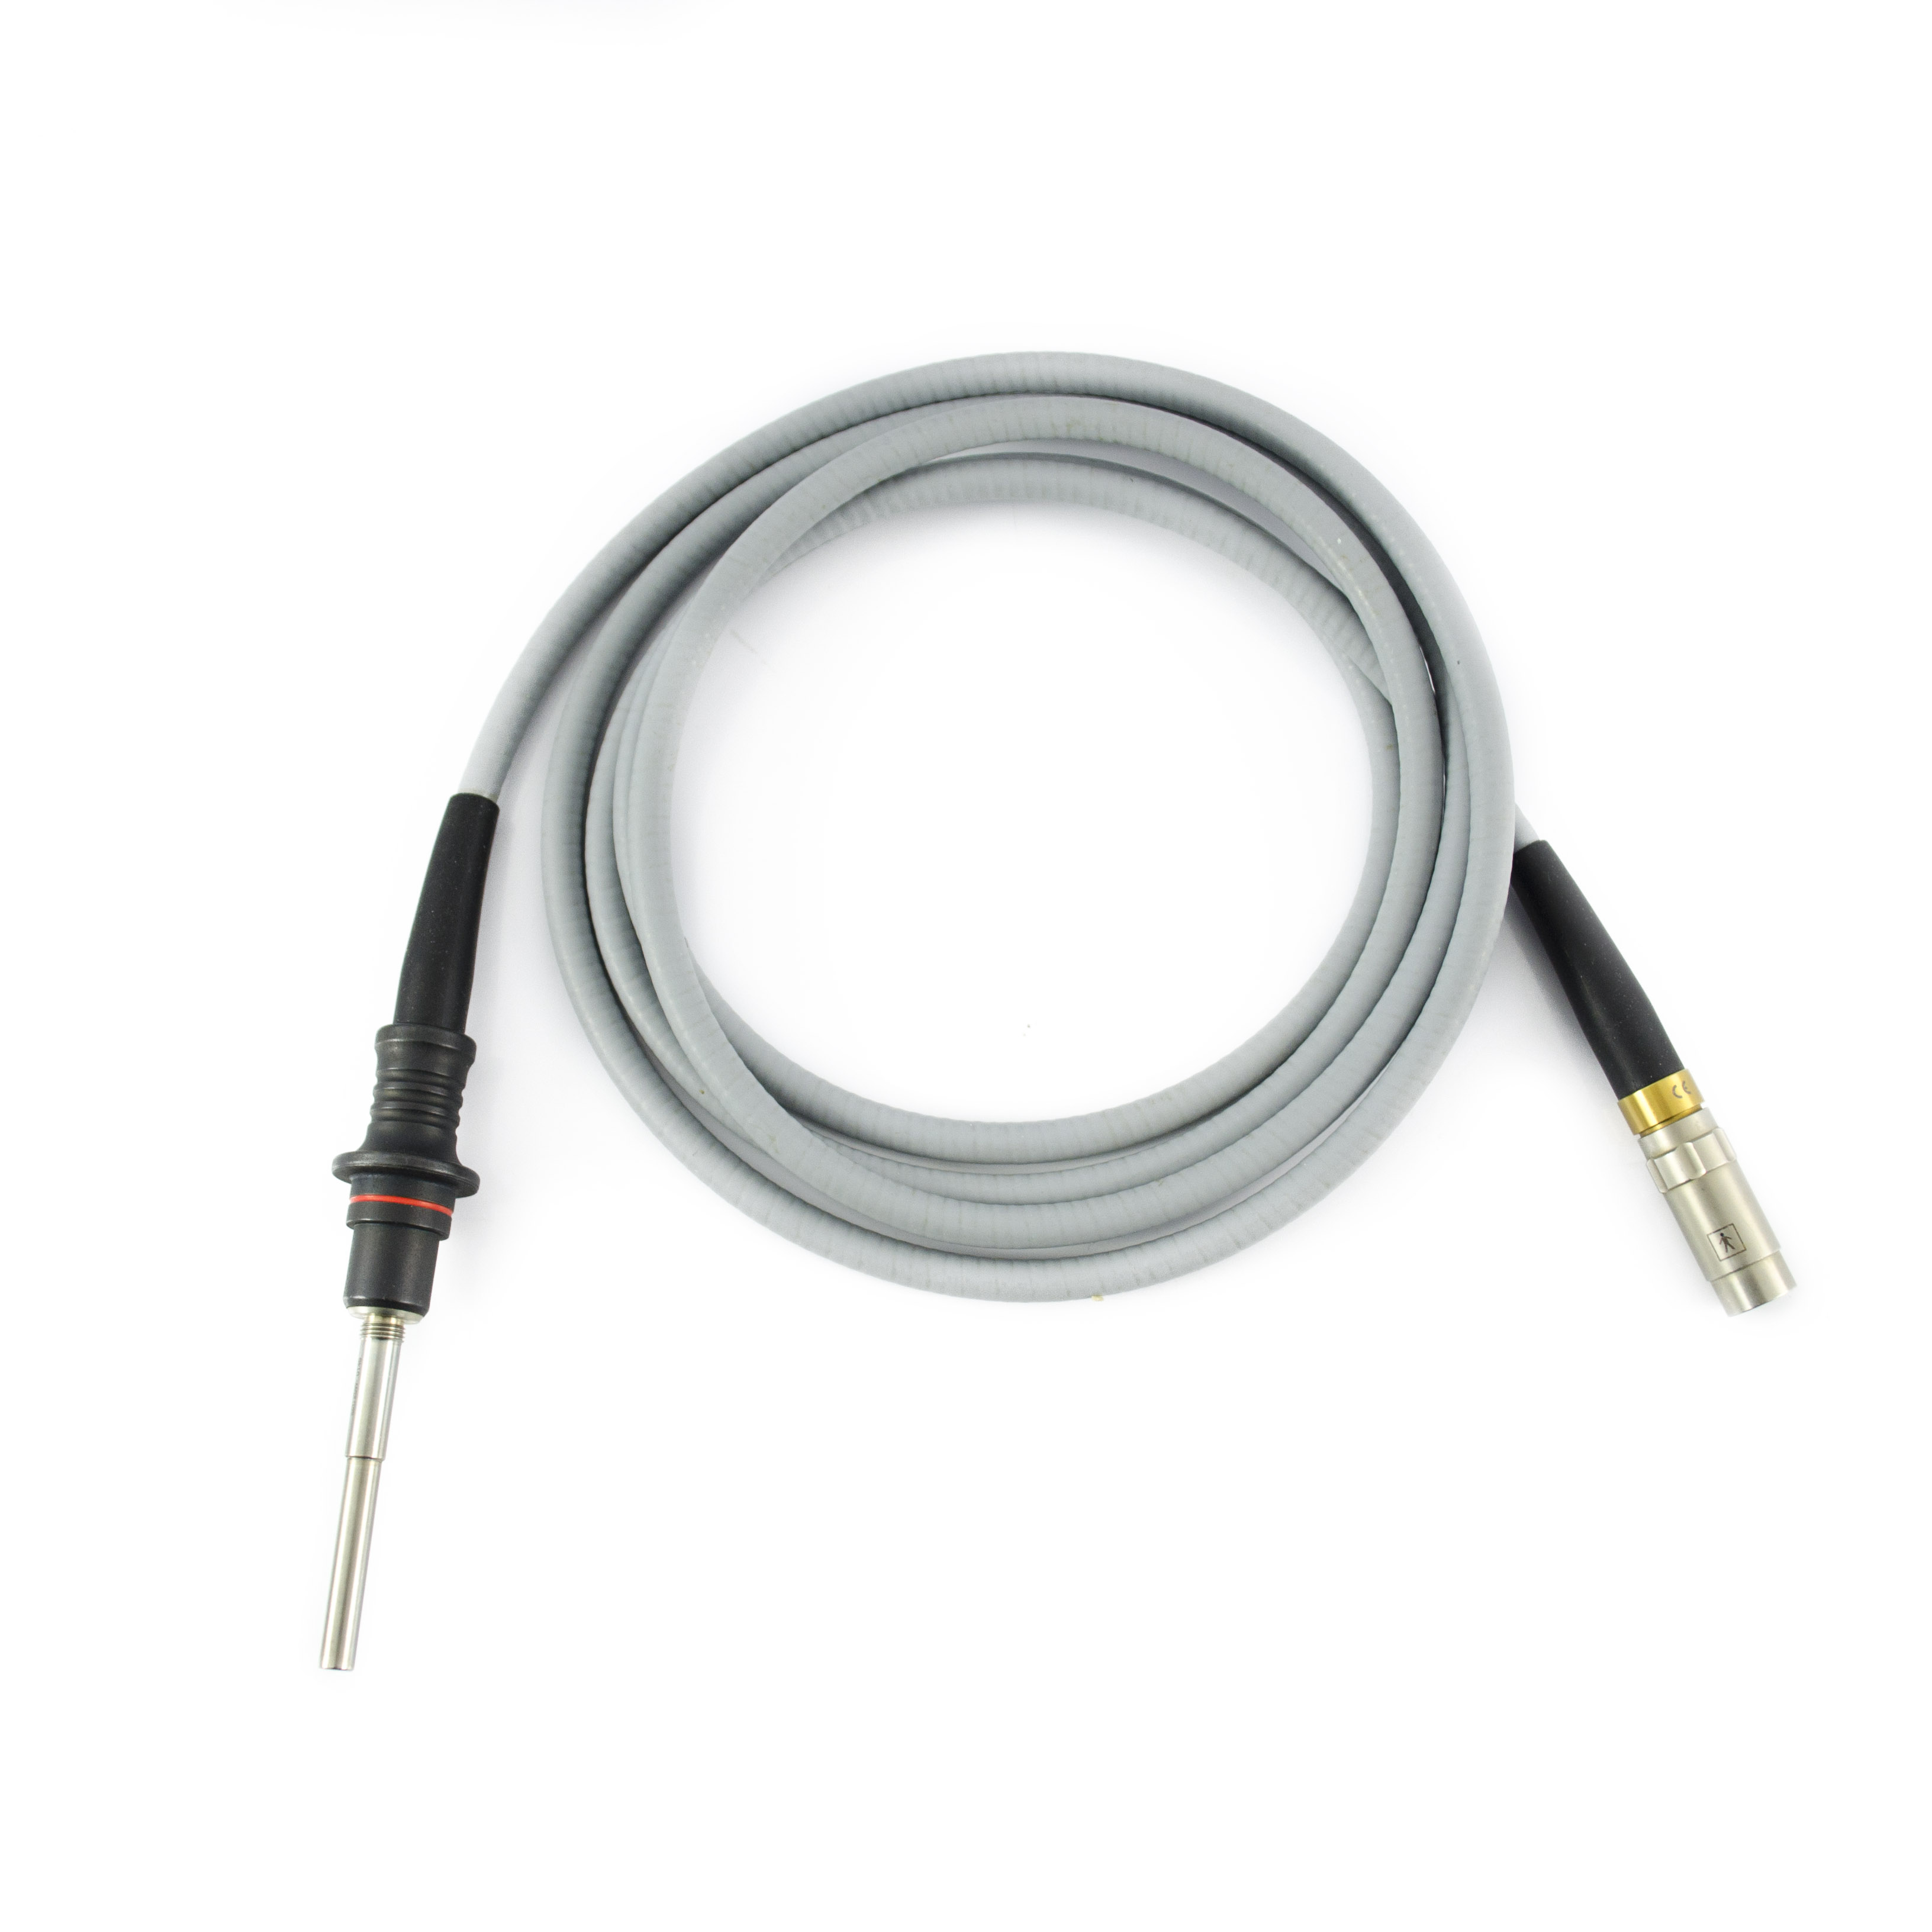 Olympus Fiber Optic Light Guide Cable - A3294